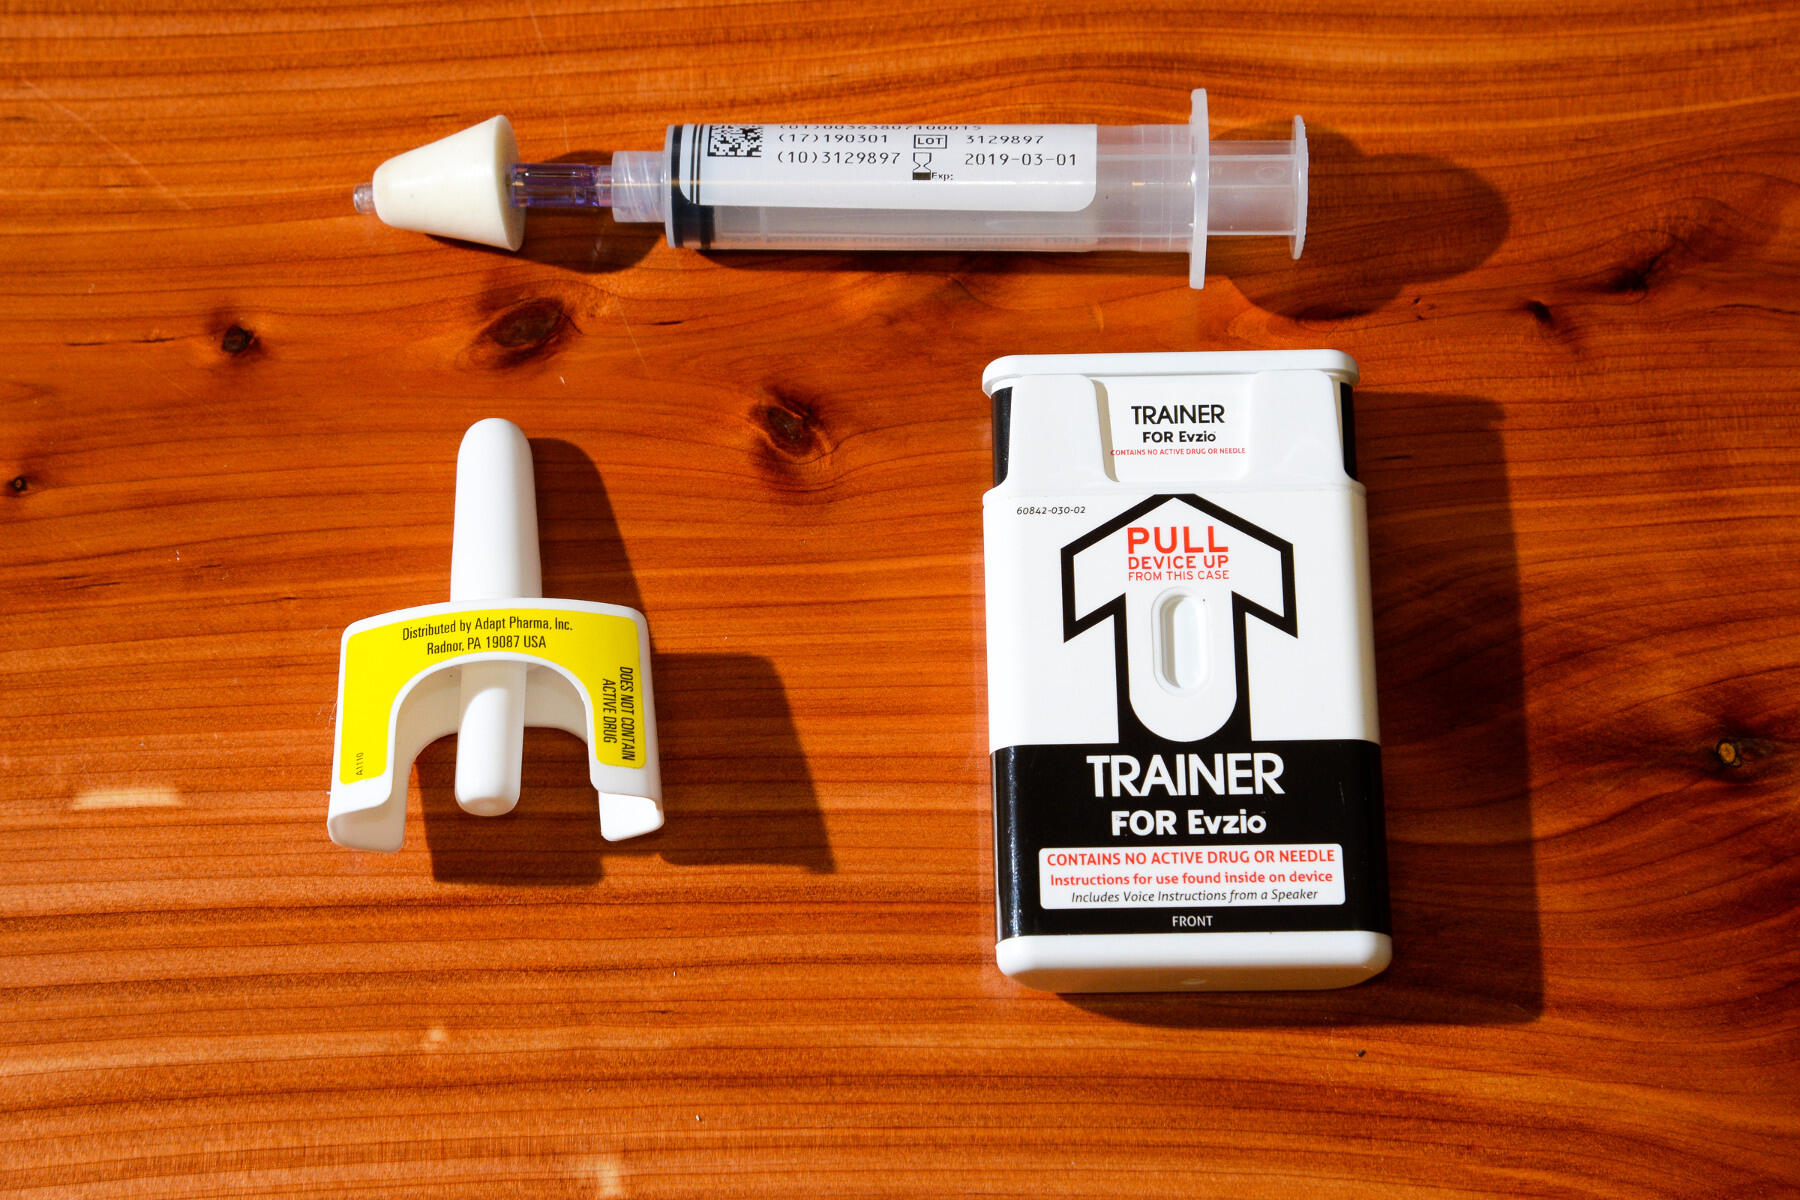 Three varieties of naloxone training devices sit on a wood table.

